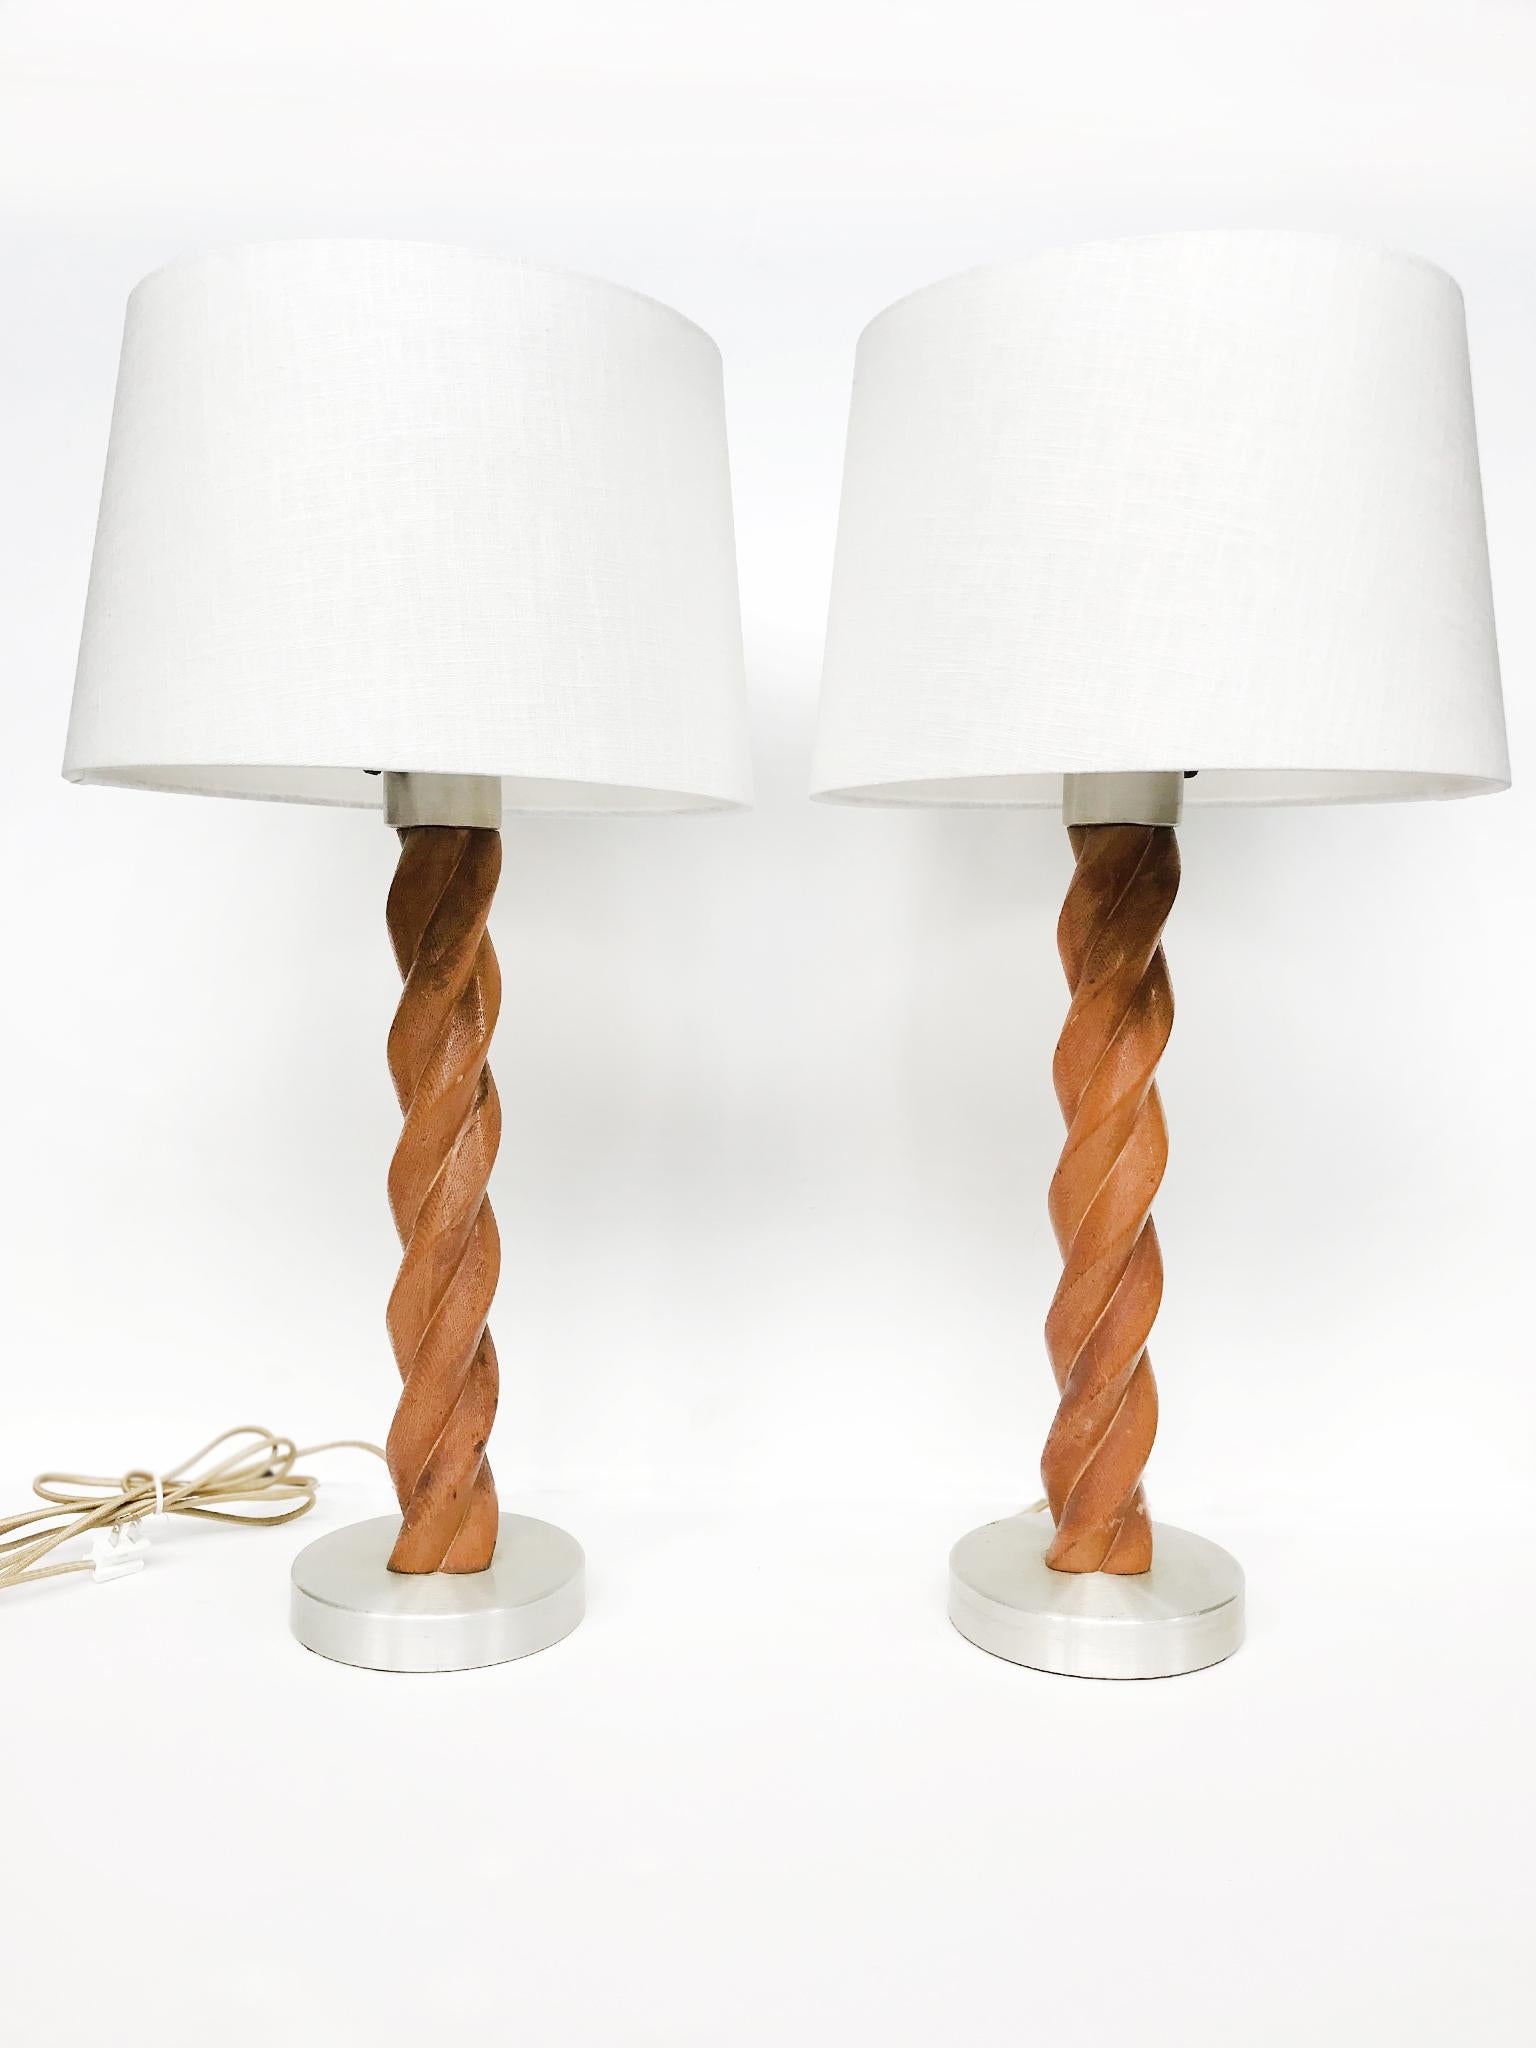 An elegant pair of table lamps attributed to the American designer Russel Wright. The lamps are comprised of a sculptural, twisting stem carved from oak and a circular aluminum base and insulate sleeve. The wood is richly stained in a warm honey